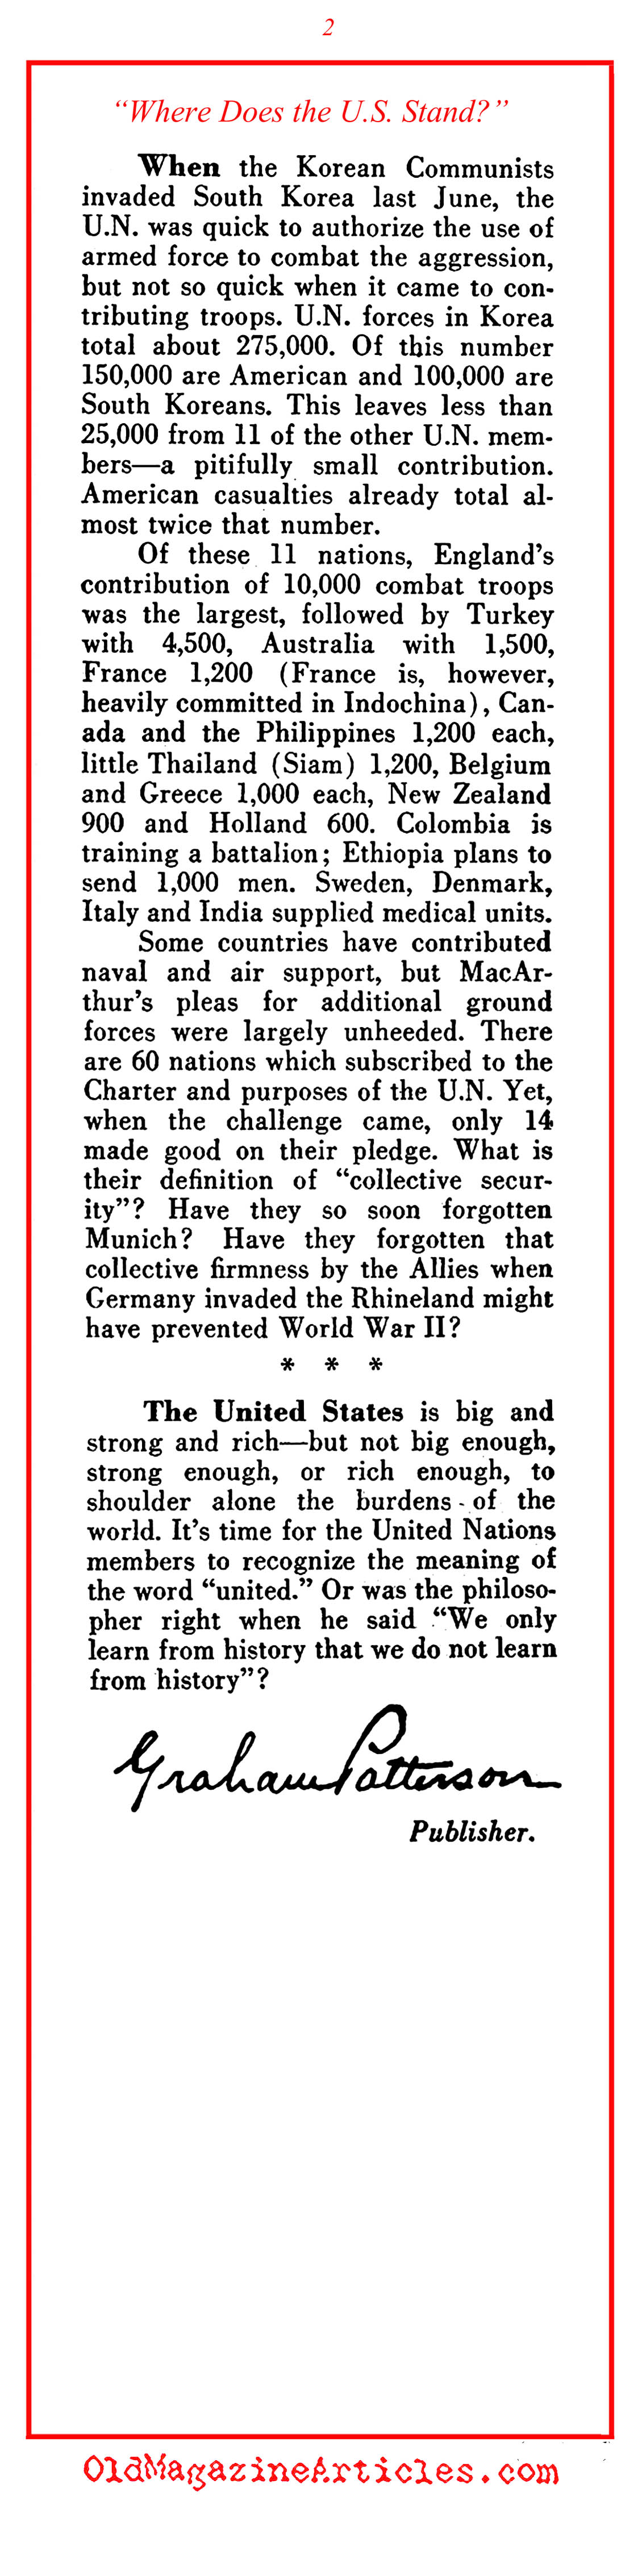 The U.N. and Collective Security (Pathfinder Magazine, 1951)